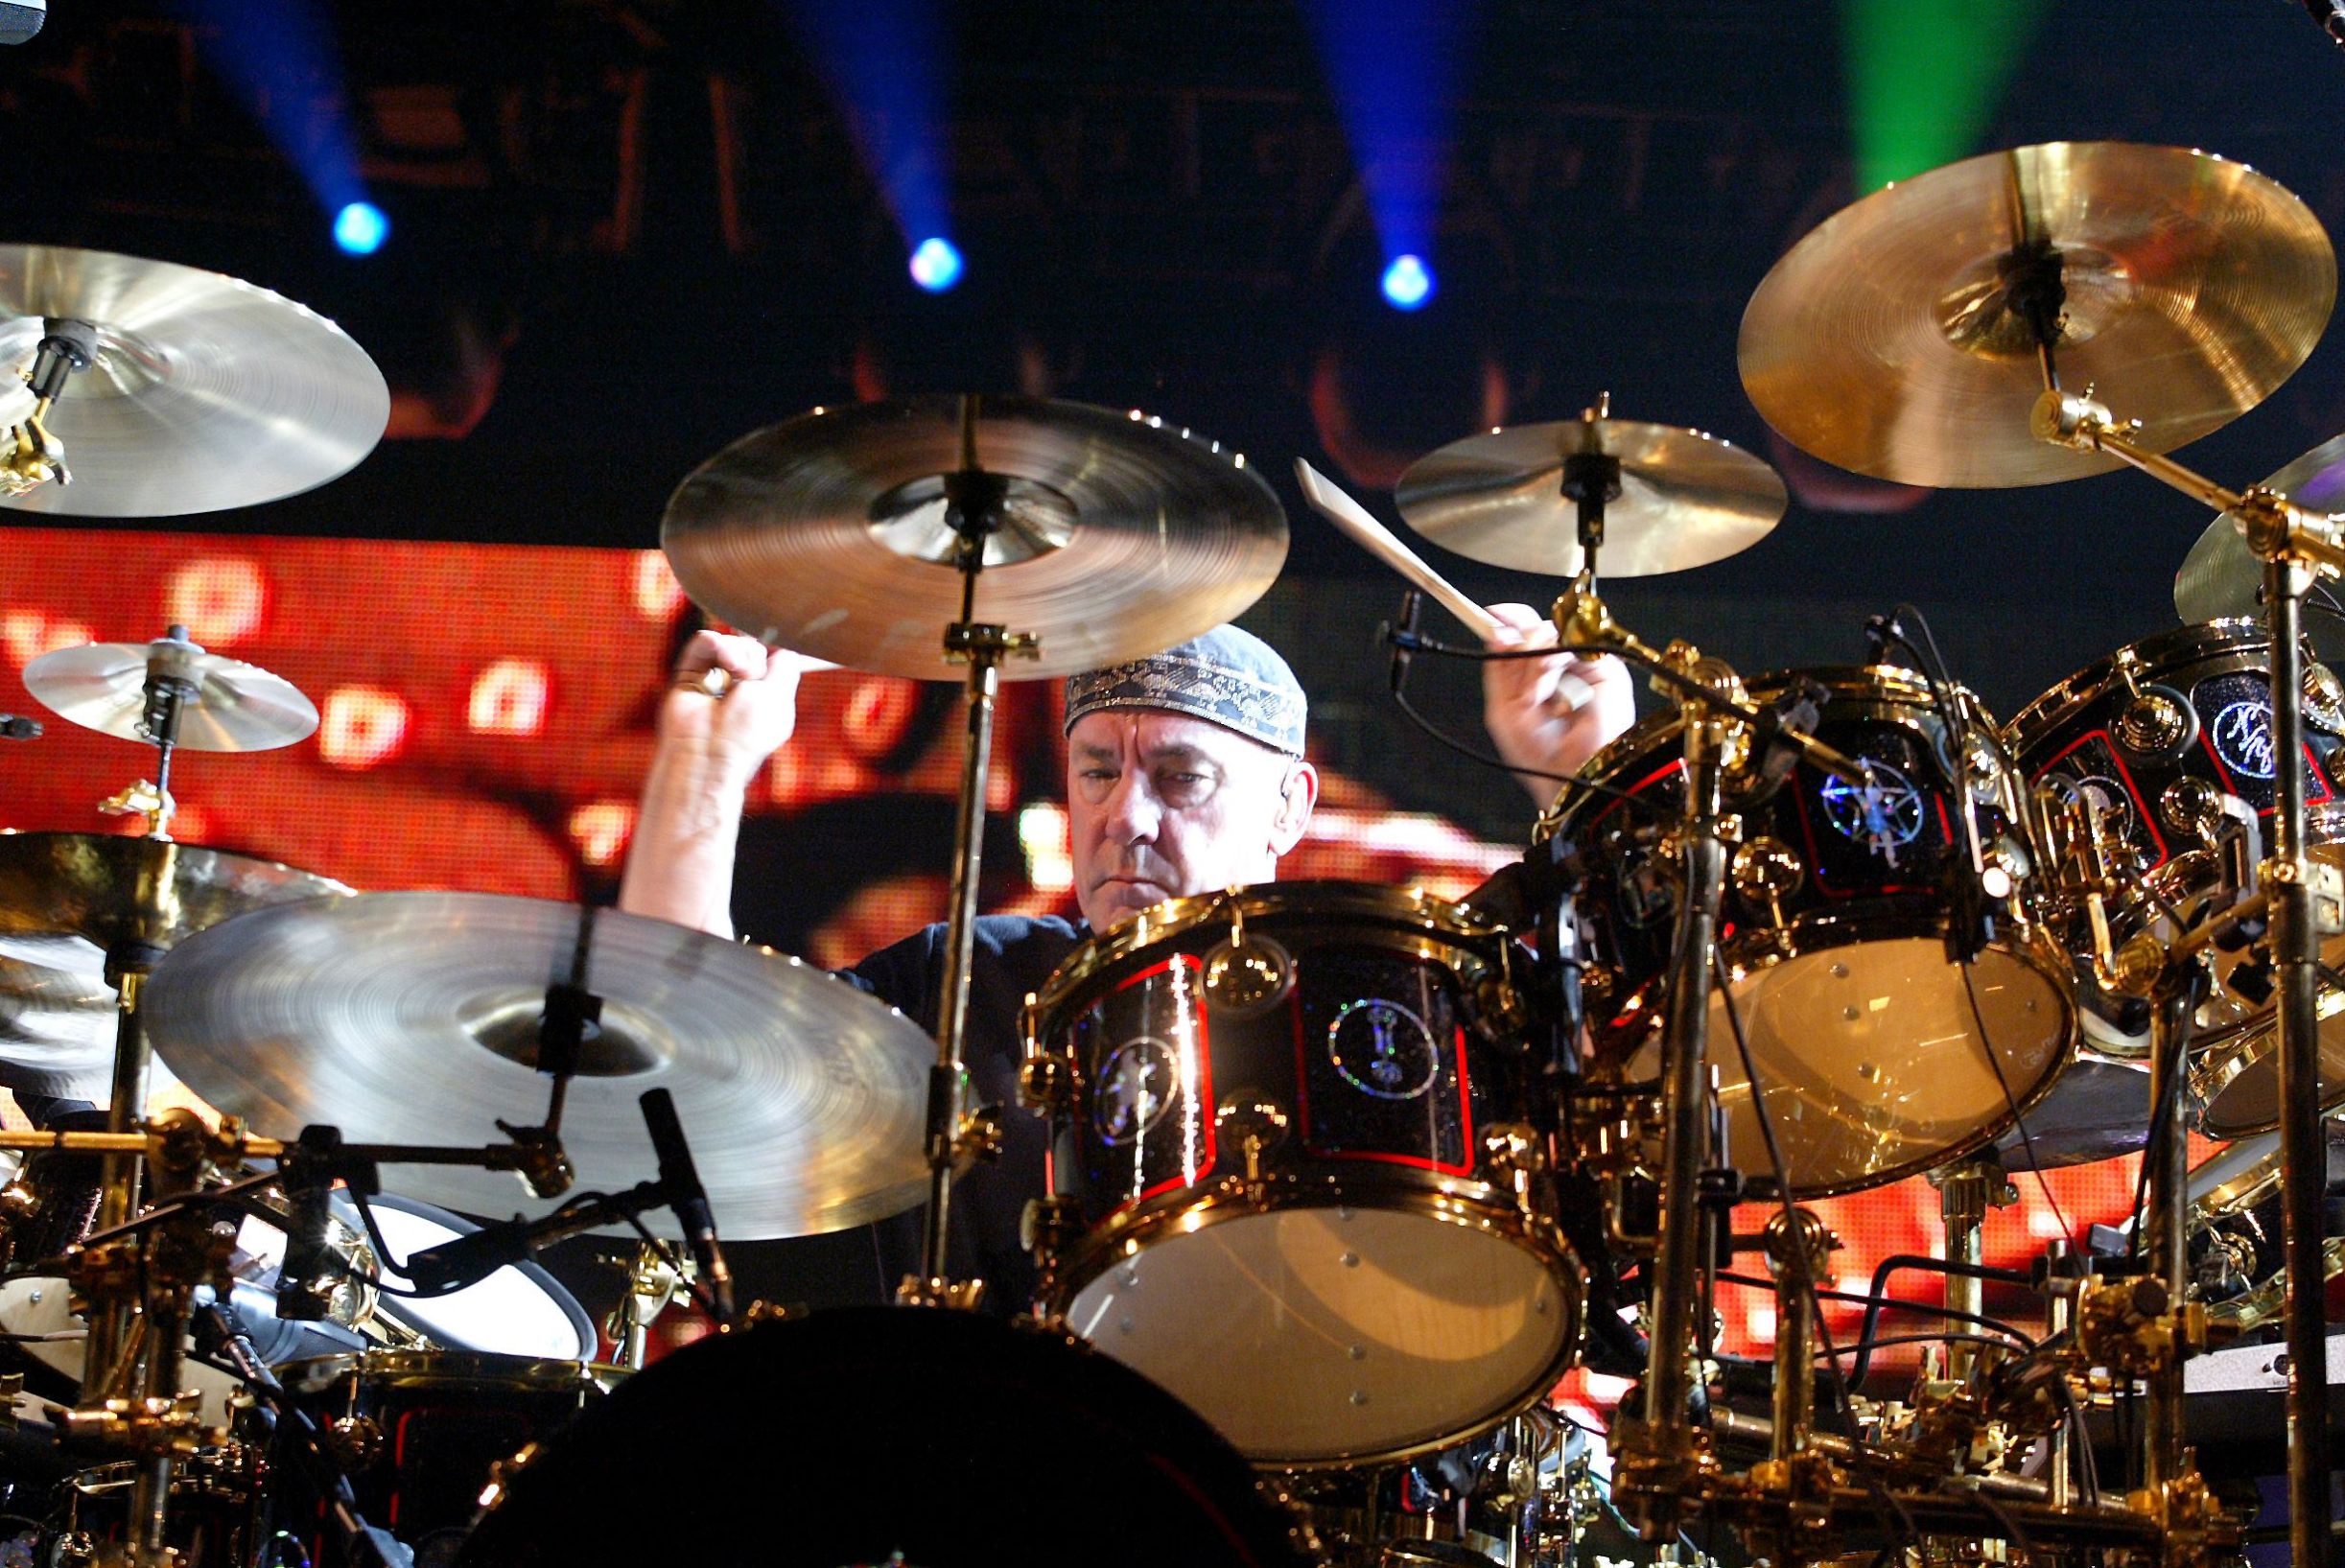 Canadian band Rush legendary drummer Neil Peart passed away at 67 for an aggressive brain cancer.  The death was on january 7th, but the bad news was confirmed only today. Live file images.
10 Jan 2020, Image: 492070066, License: Rights-managed, Restrictions: World Rights, Model Release: no, Credit line: Bruno Marzi / MEGA / Mega Agency / Profimedia